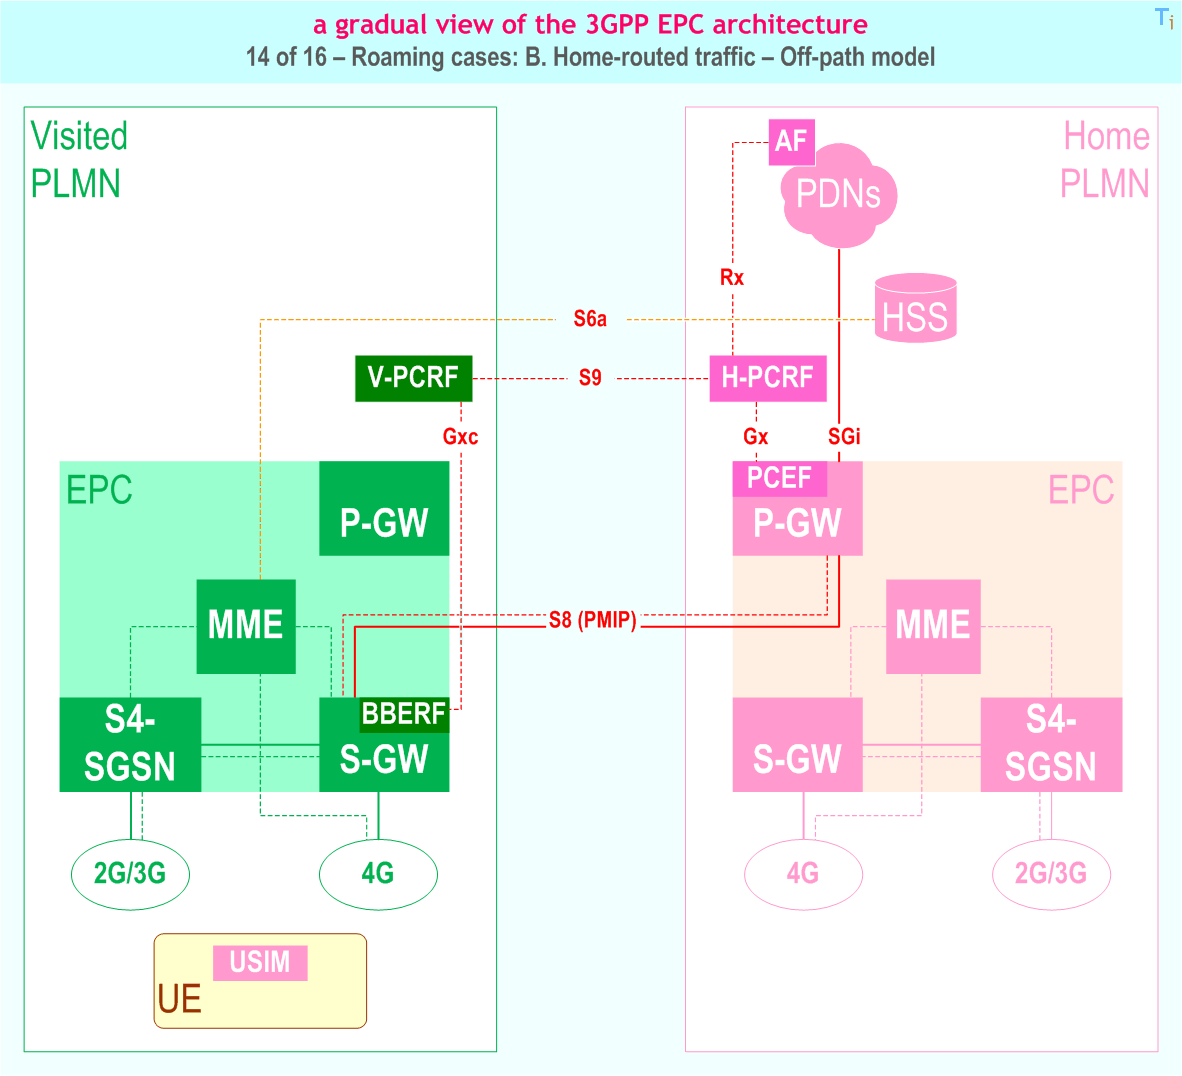 Gradual view of the 3GPP EPC (Evolved Packet Core) architecture - 14 of 16 - EPC Roaming: Home-routed traffic - off-path model: S8 variant is PMIP